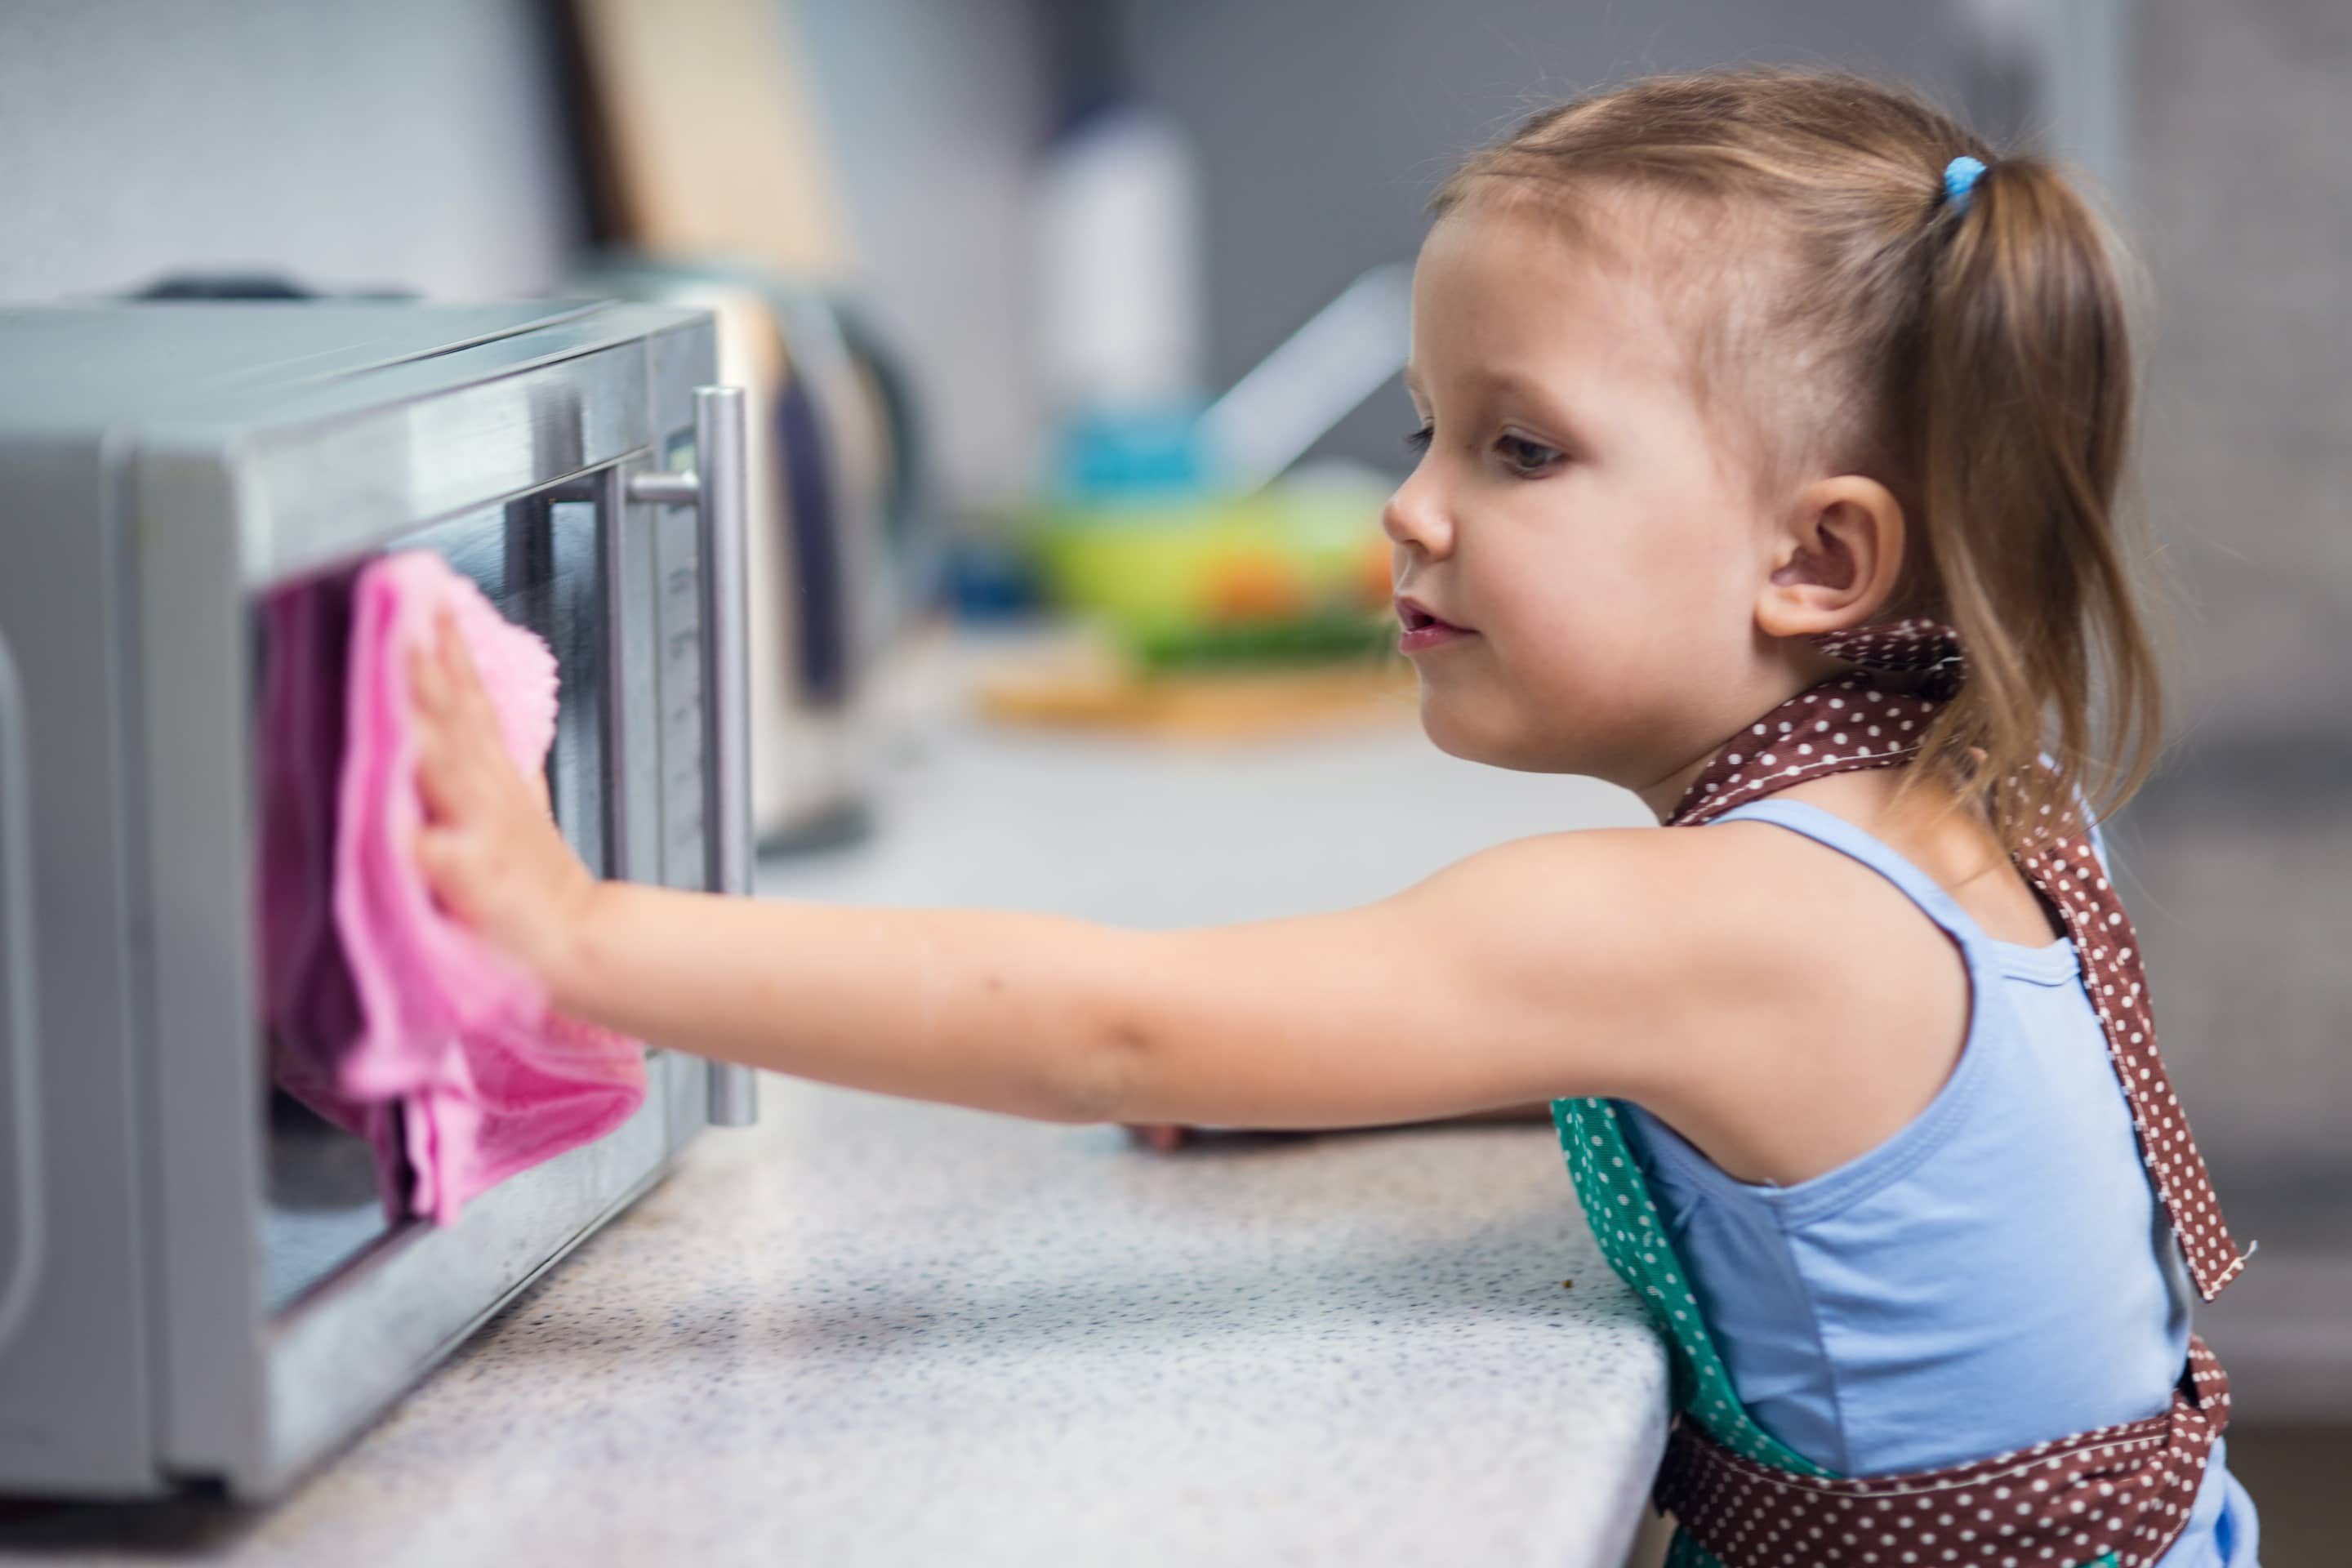 Young girl wiping the toaster oven in the kitchen.